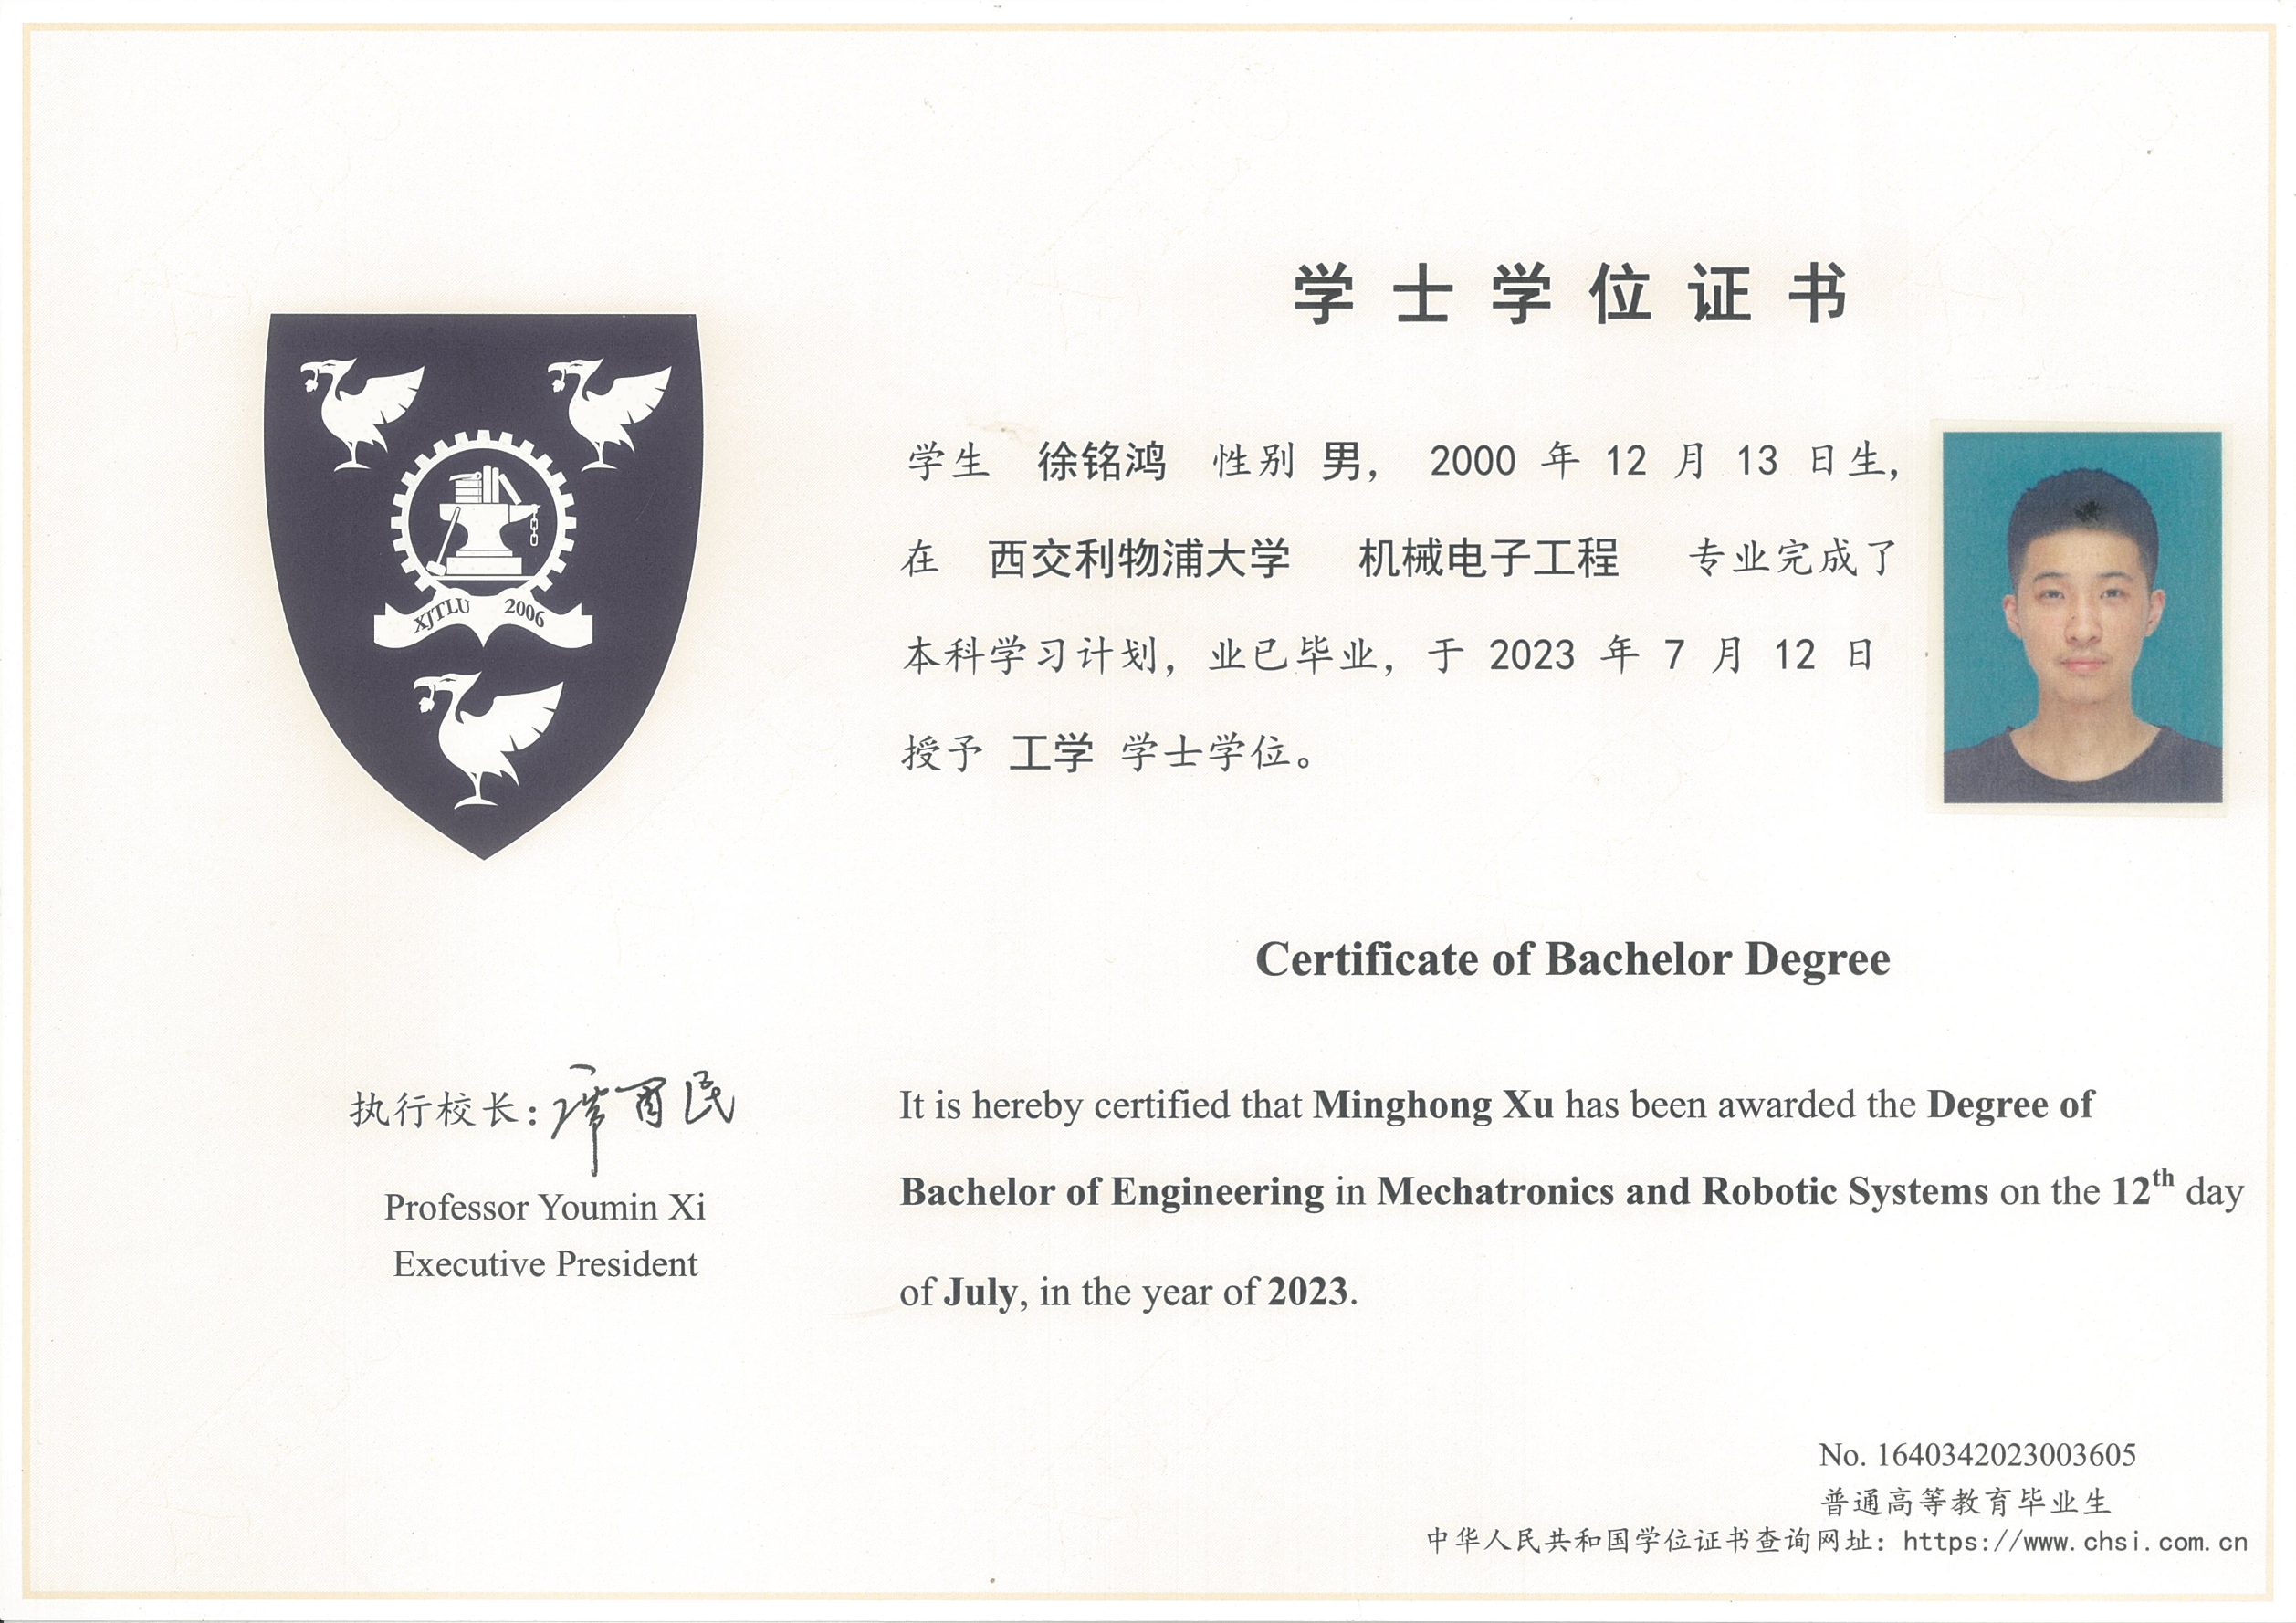 Degree certificate awarded by Xi'an Jiaotong-Liverpool University